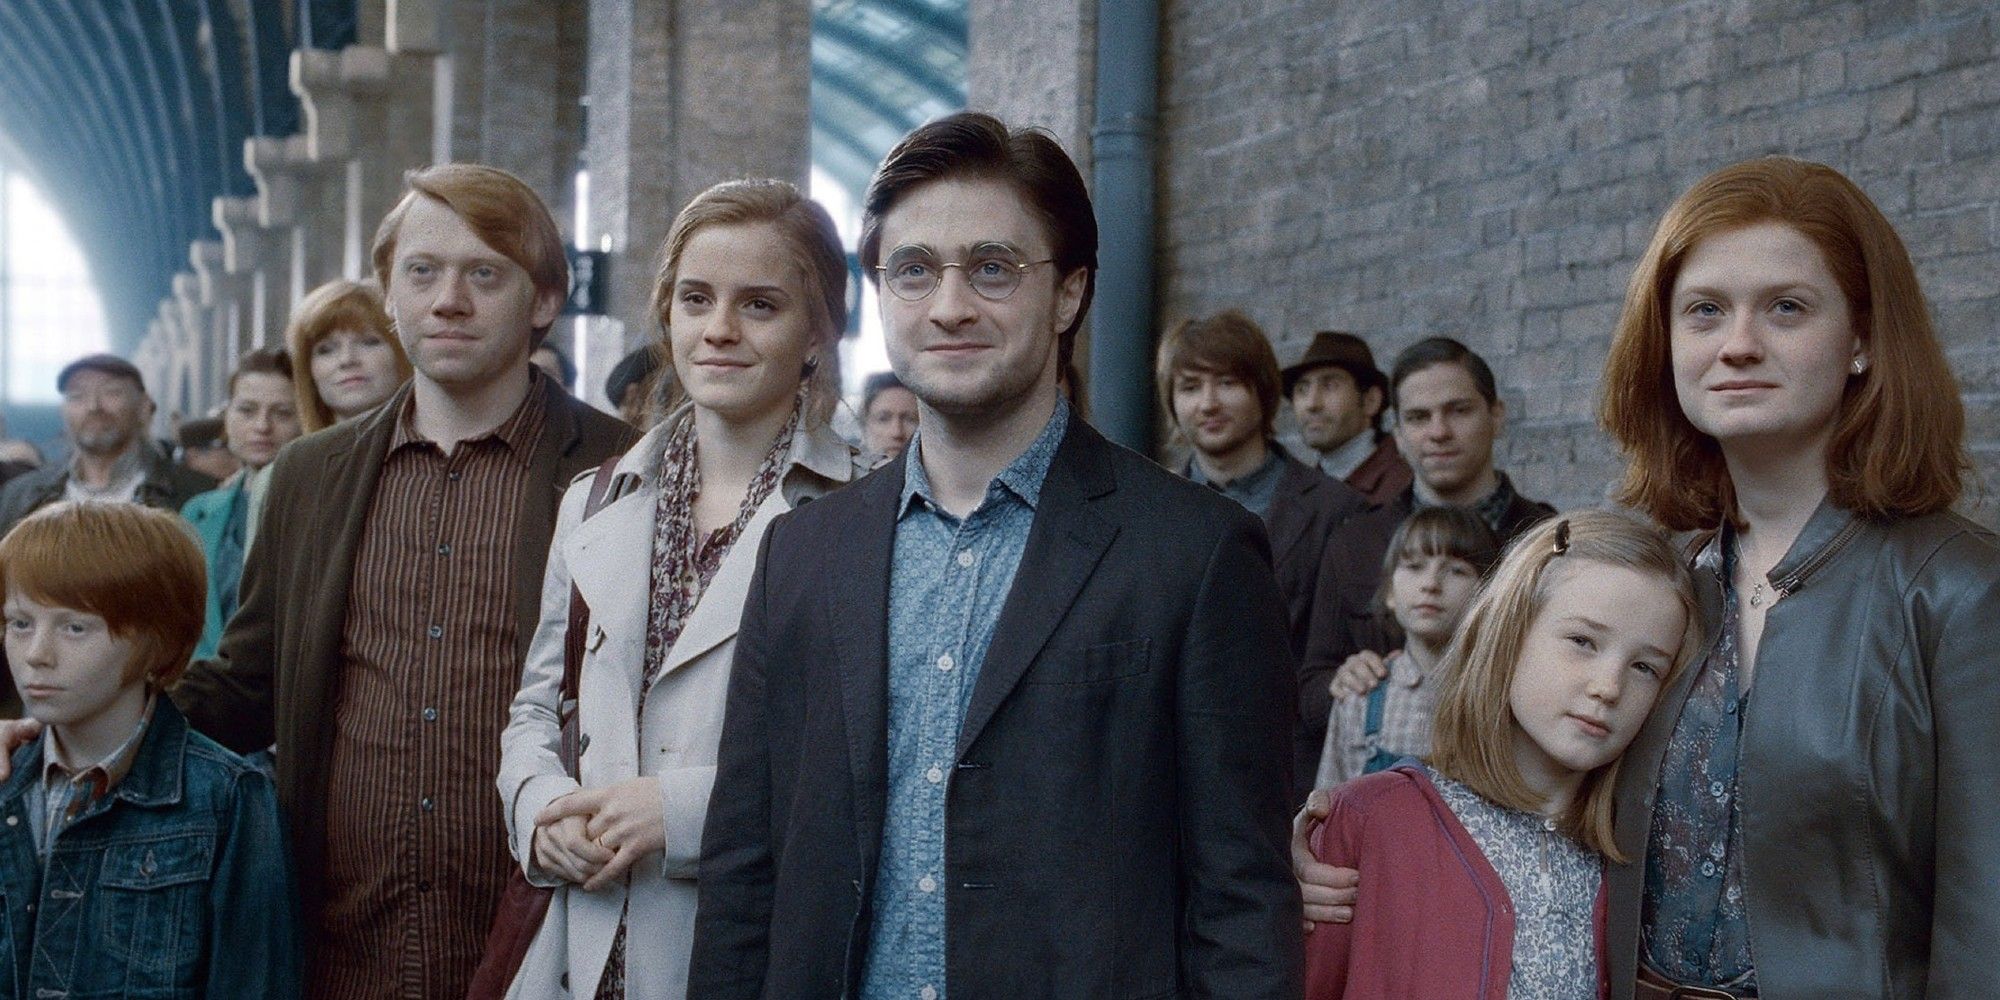 Ryan Turner, Rupert Grint, Emma Watson, Daniel Radcliffe, Daphne de Beistegui and Bonnie Wright in Harry Potter And The Deathly Hallows Part 2